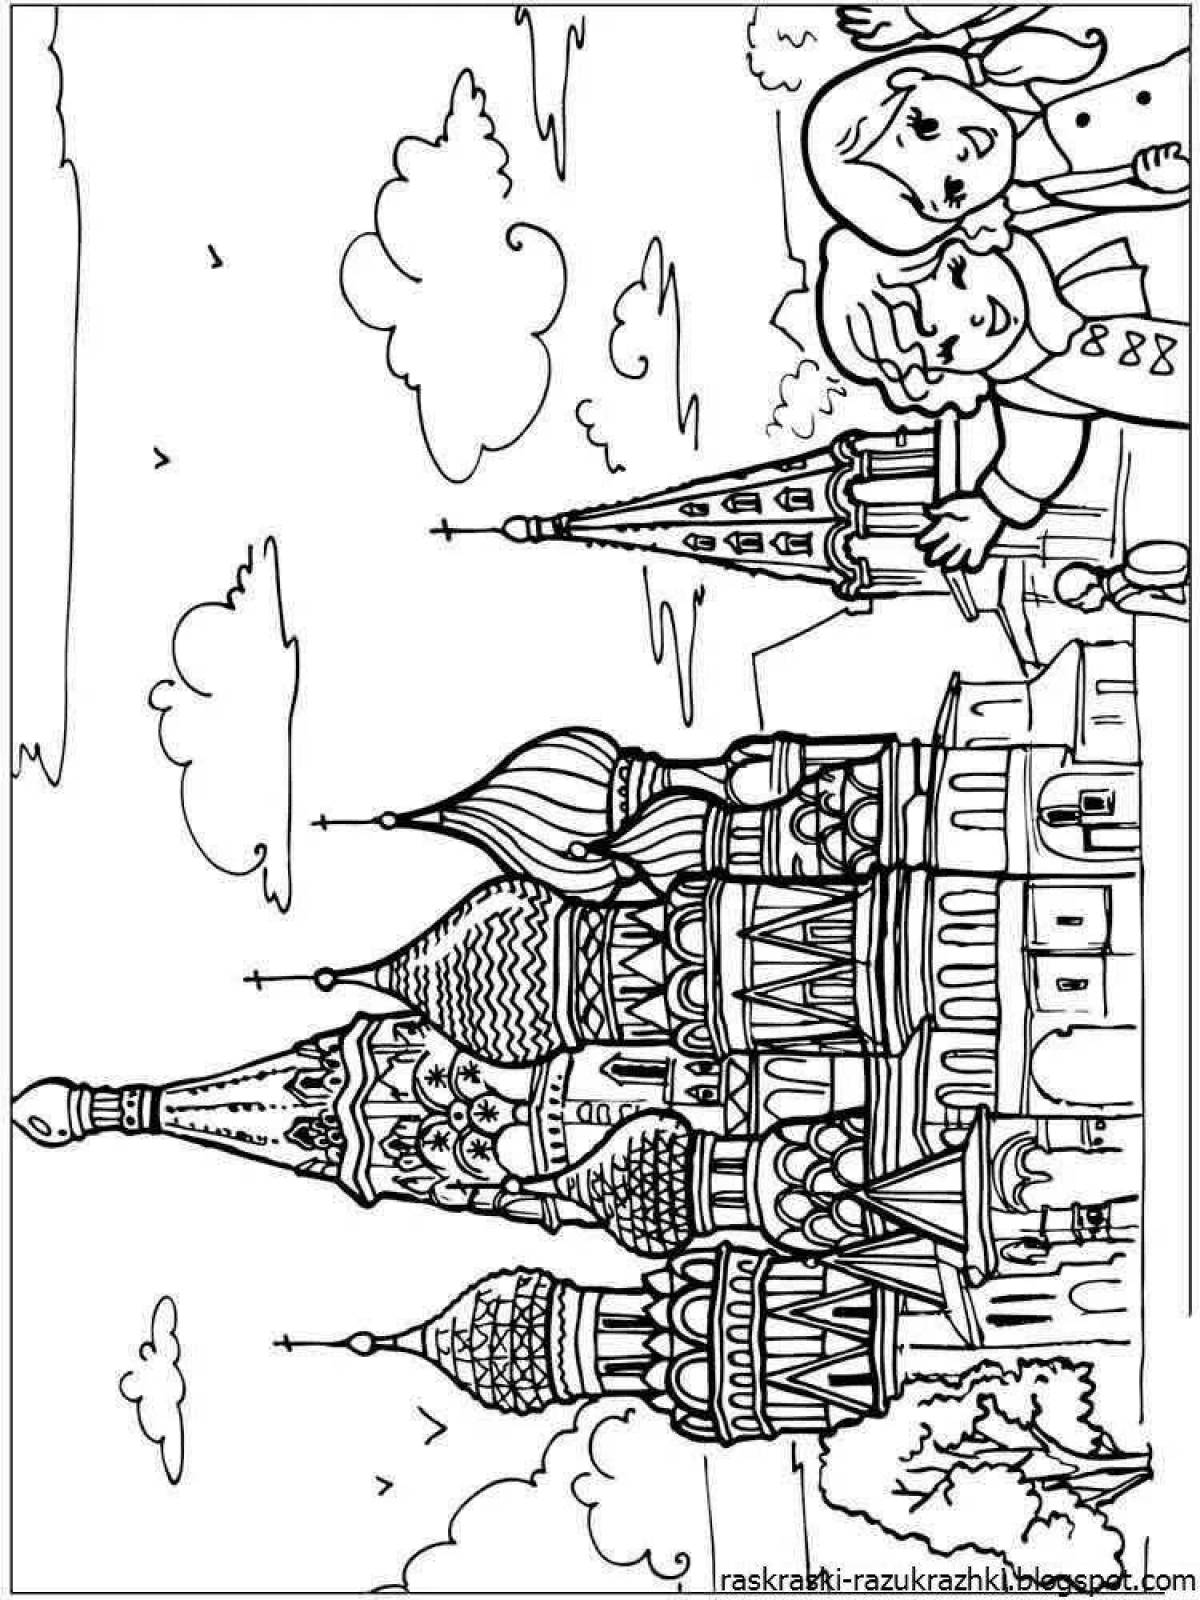 Amazing russia coloring book for kids